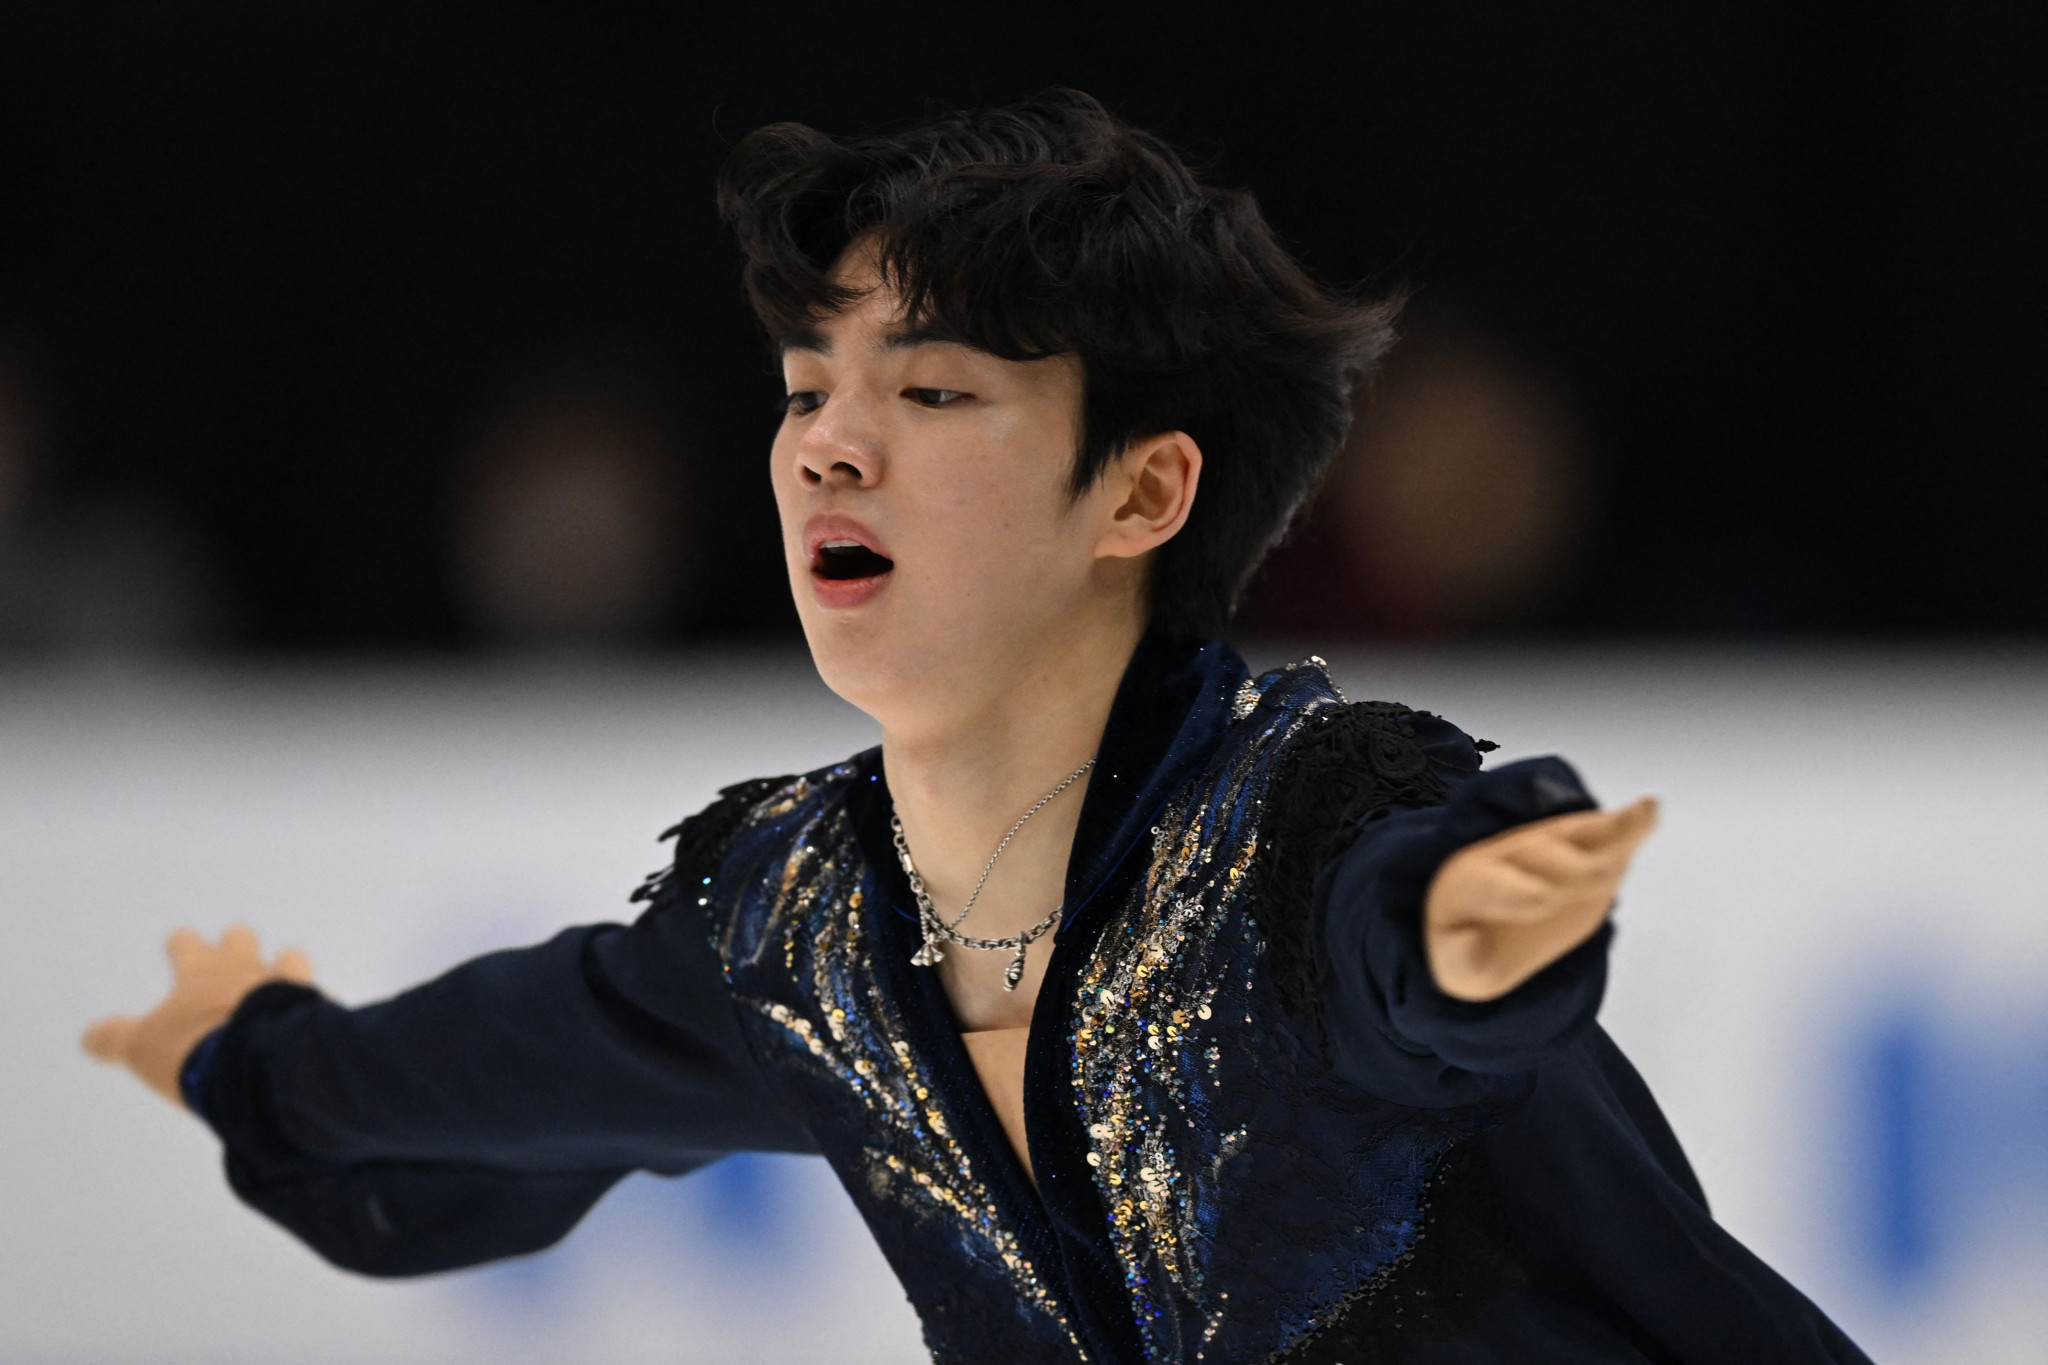 Cha wins men’s individual title at Four Continents Figure Skating Championships